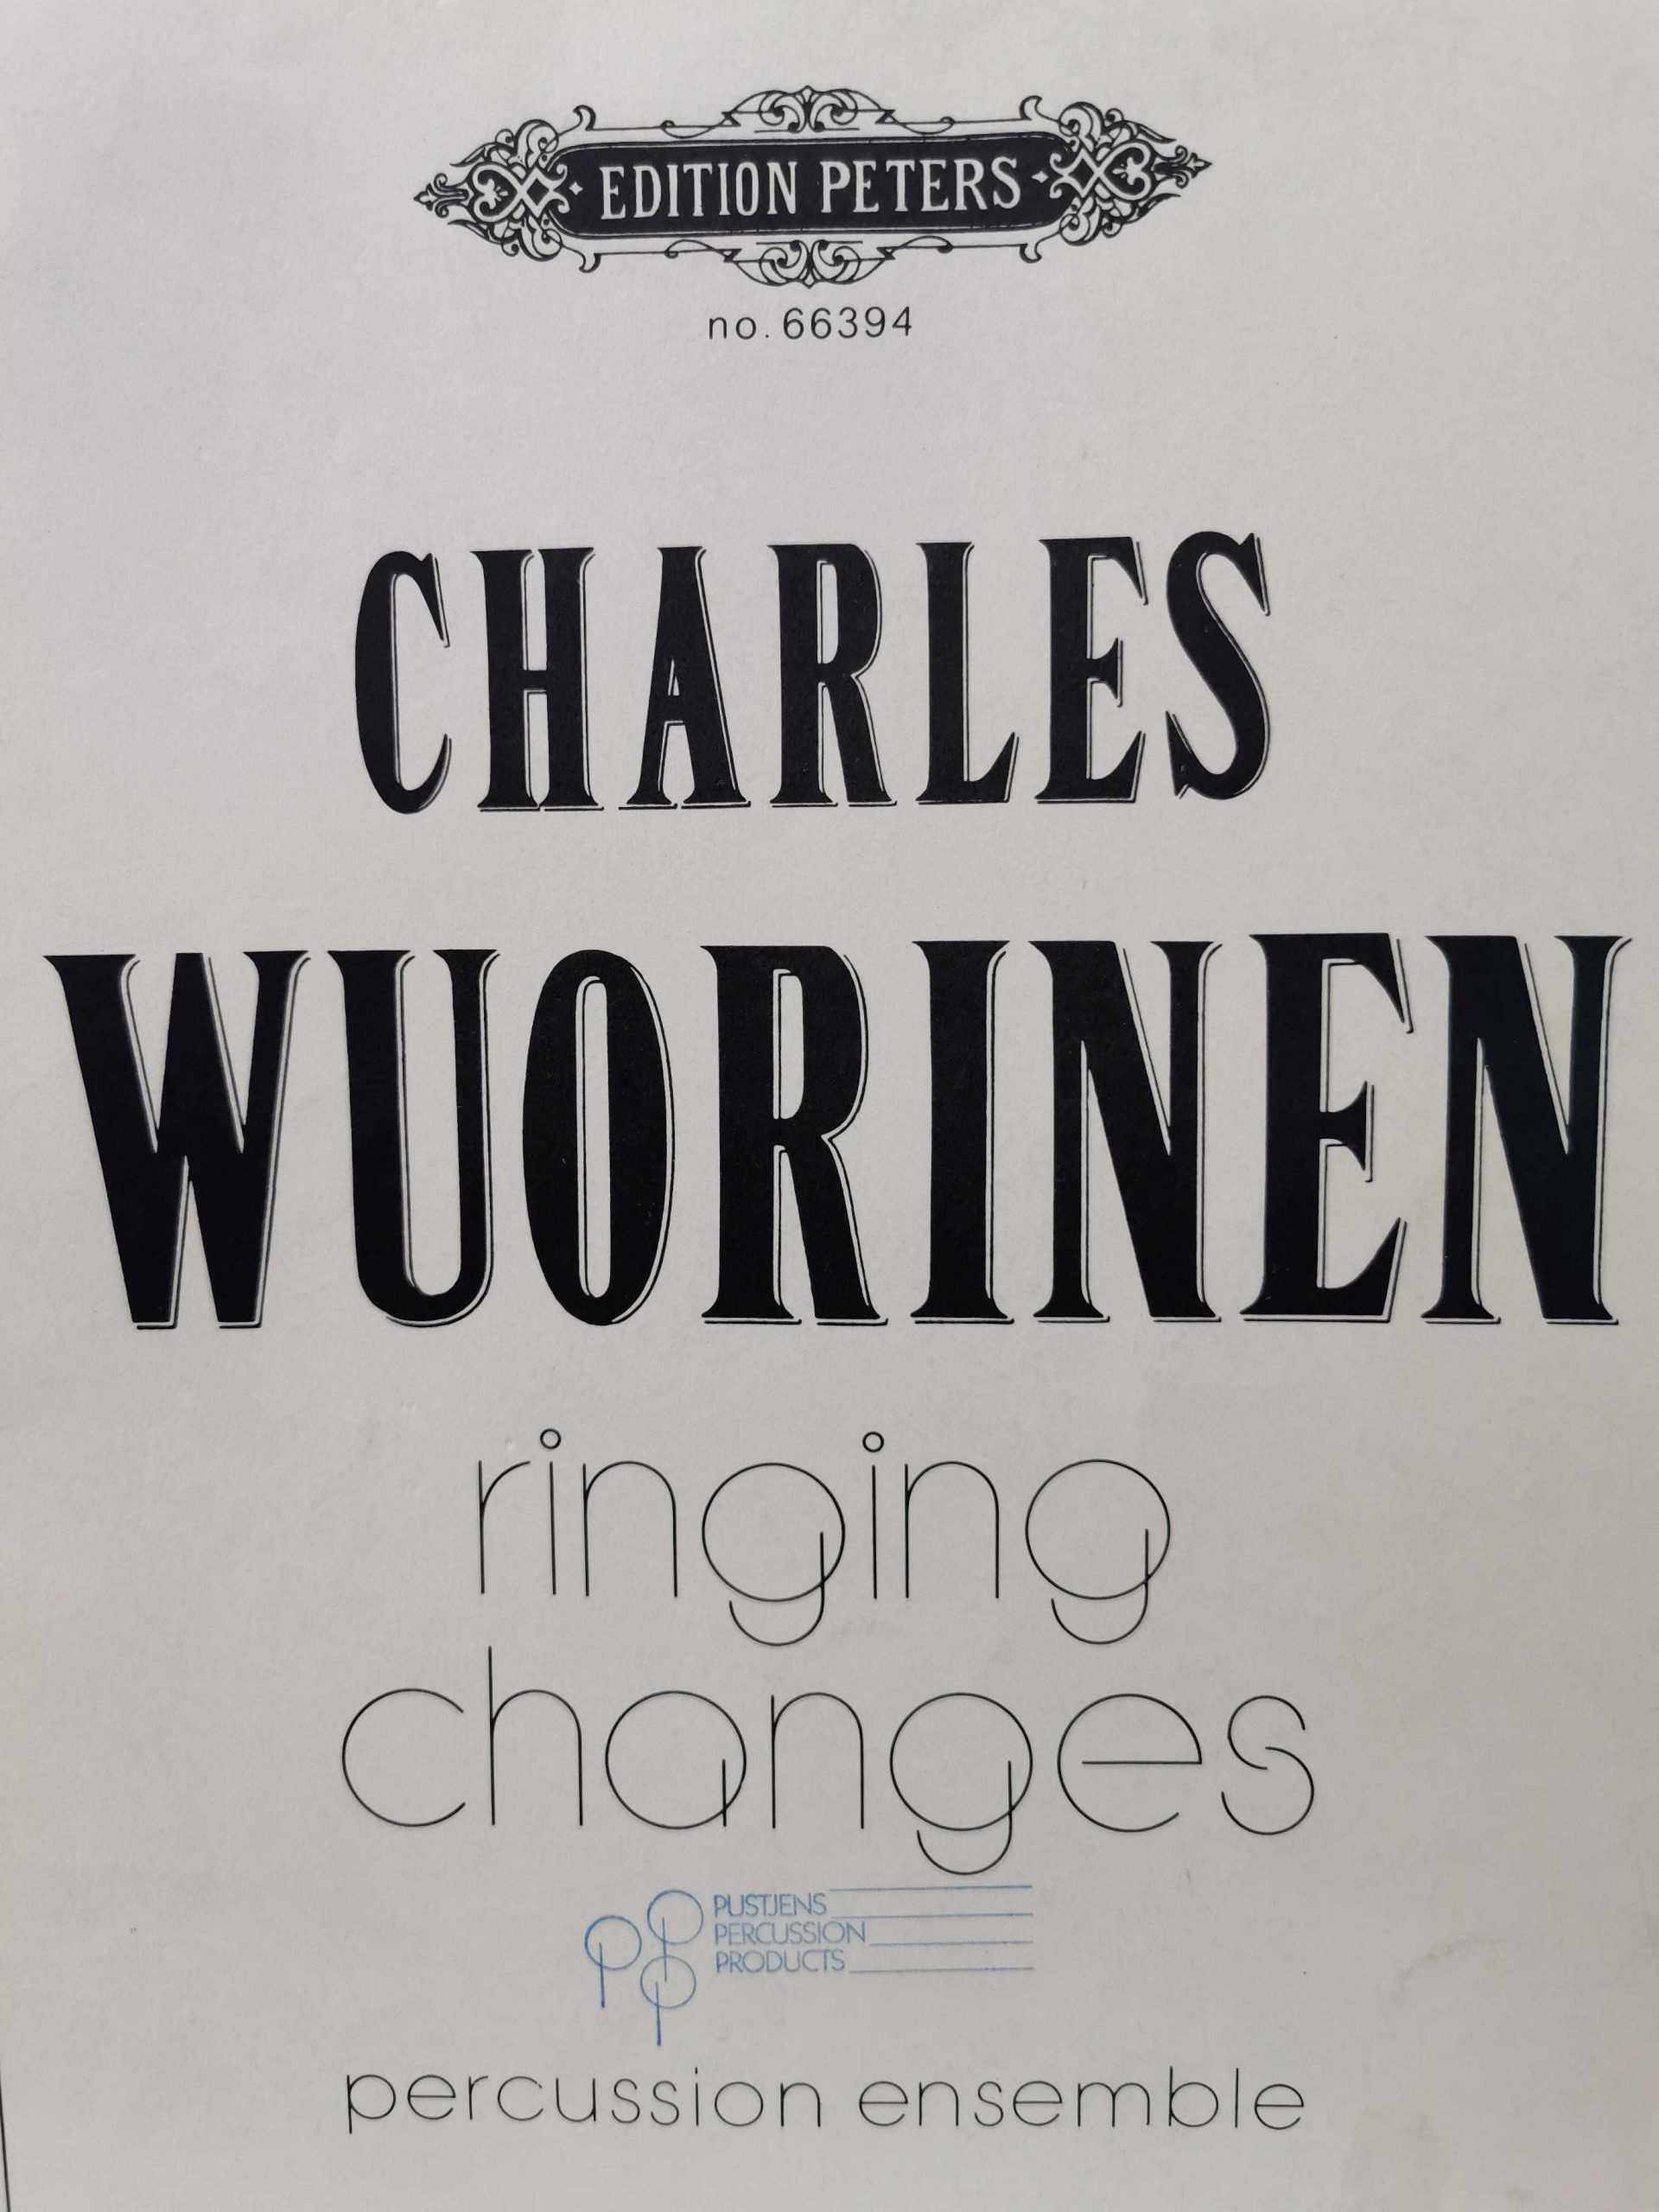 Ringing Changes by Charles Wuorinen